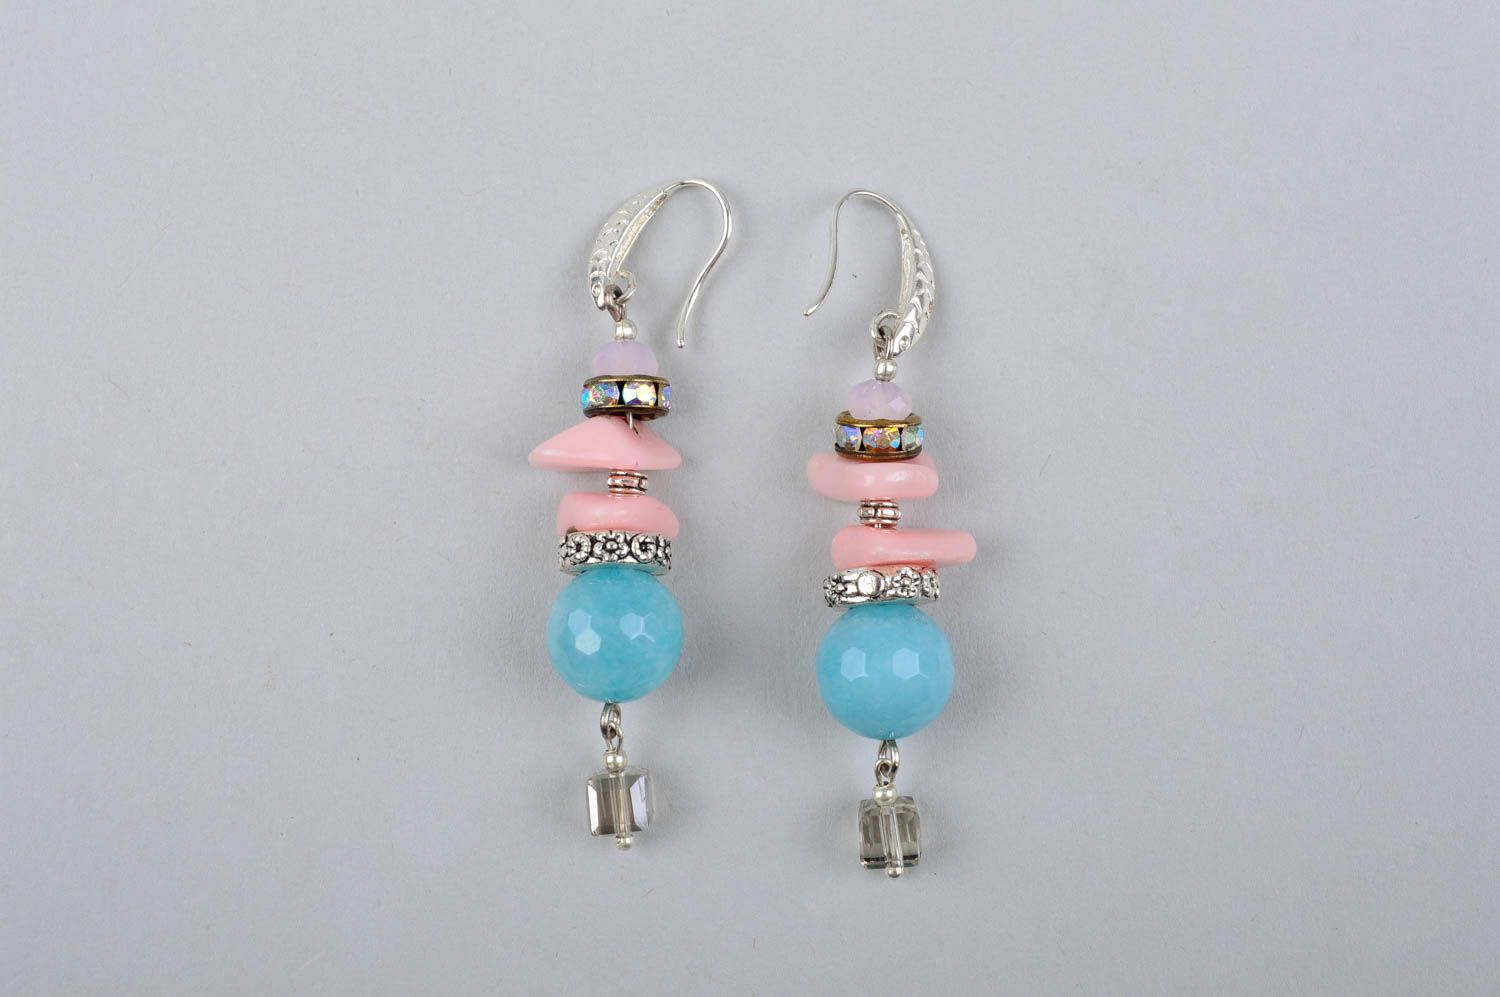 Designer accessory handmade earrings with agate pendants fashion jewelry photo 3